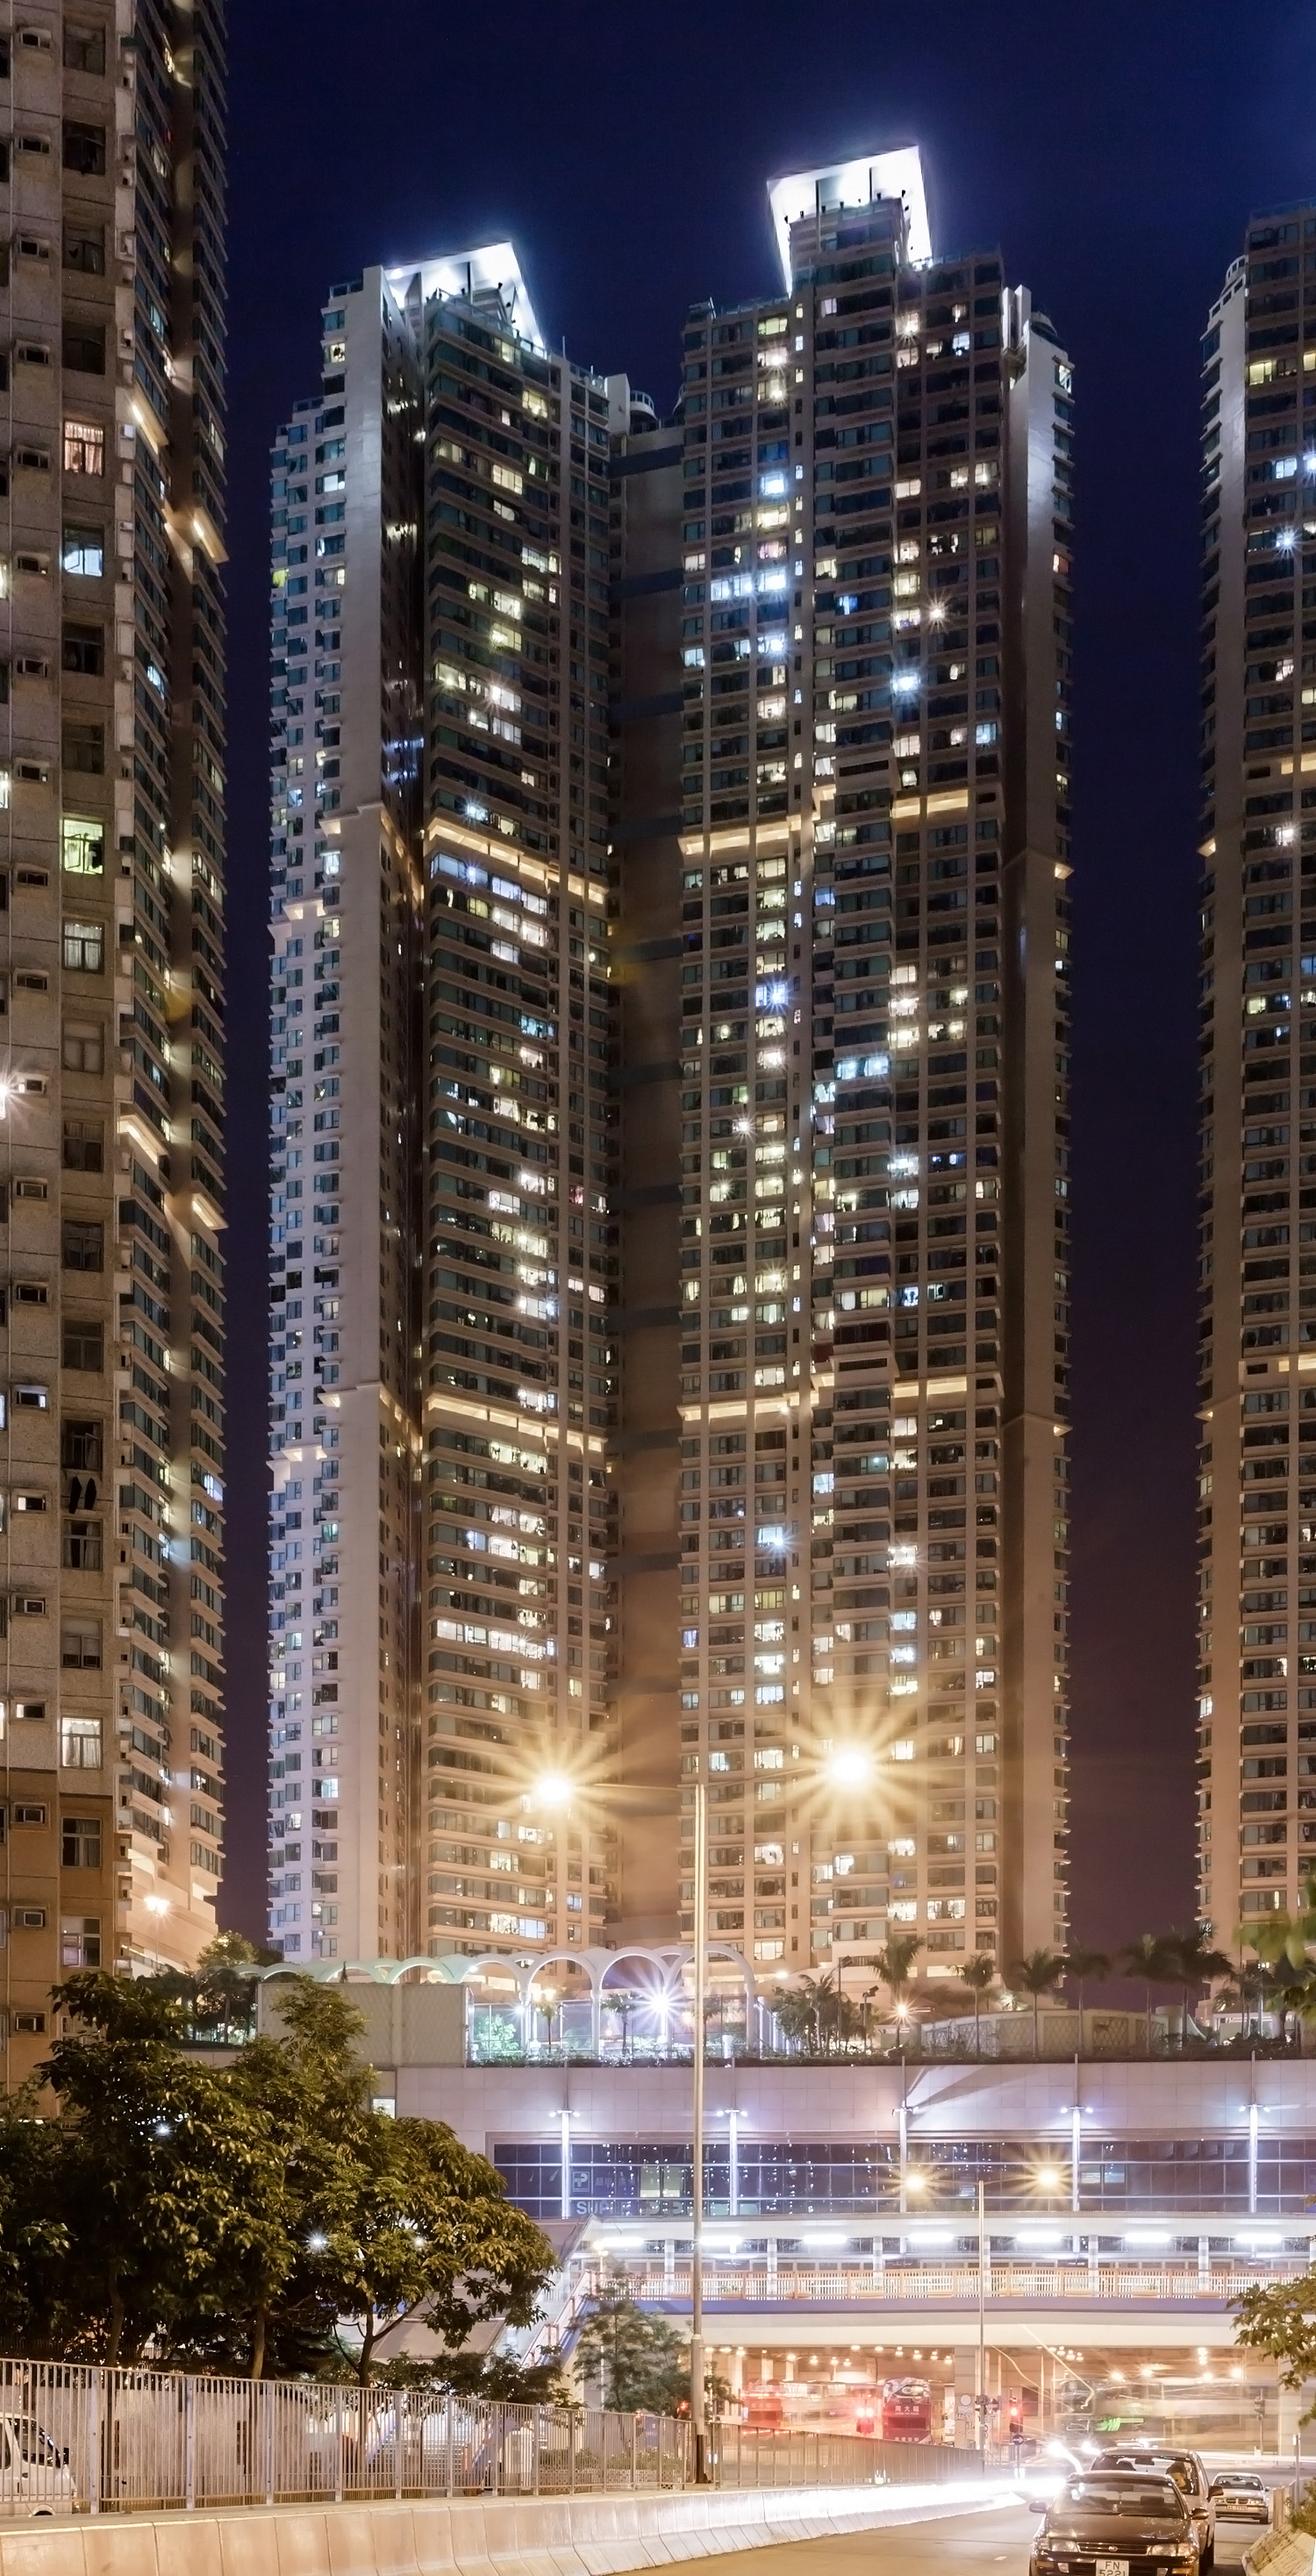 Island Resort Towers 8 & 9, Hong Kong - View from the south. © Mathias Beinling